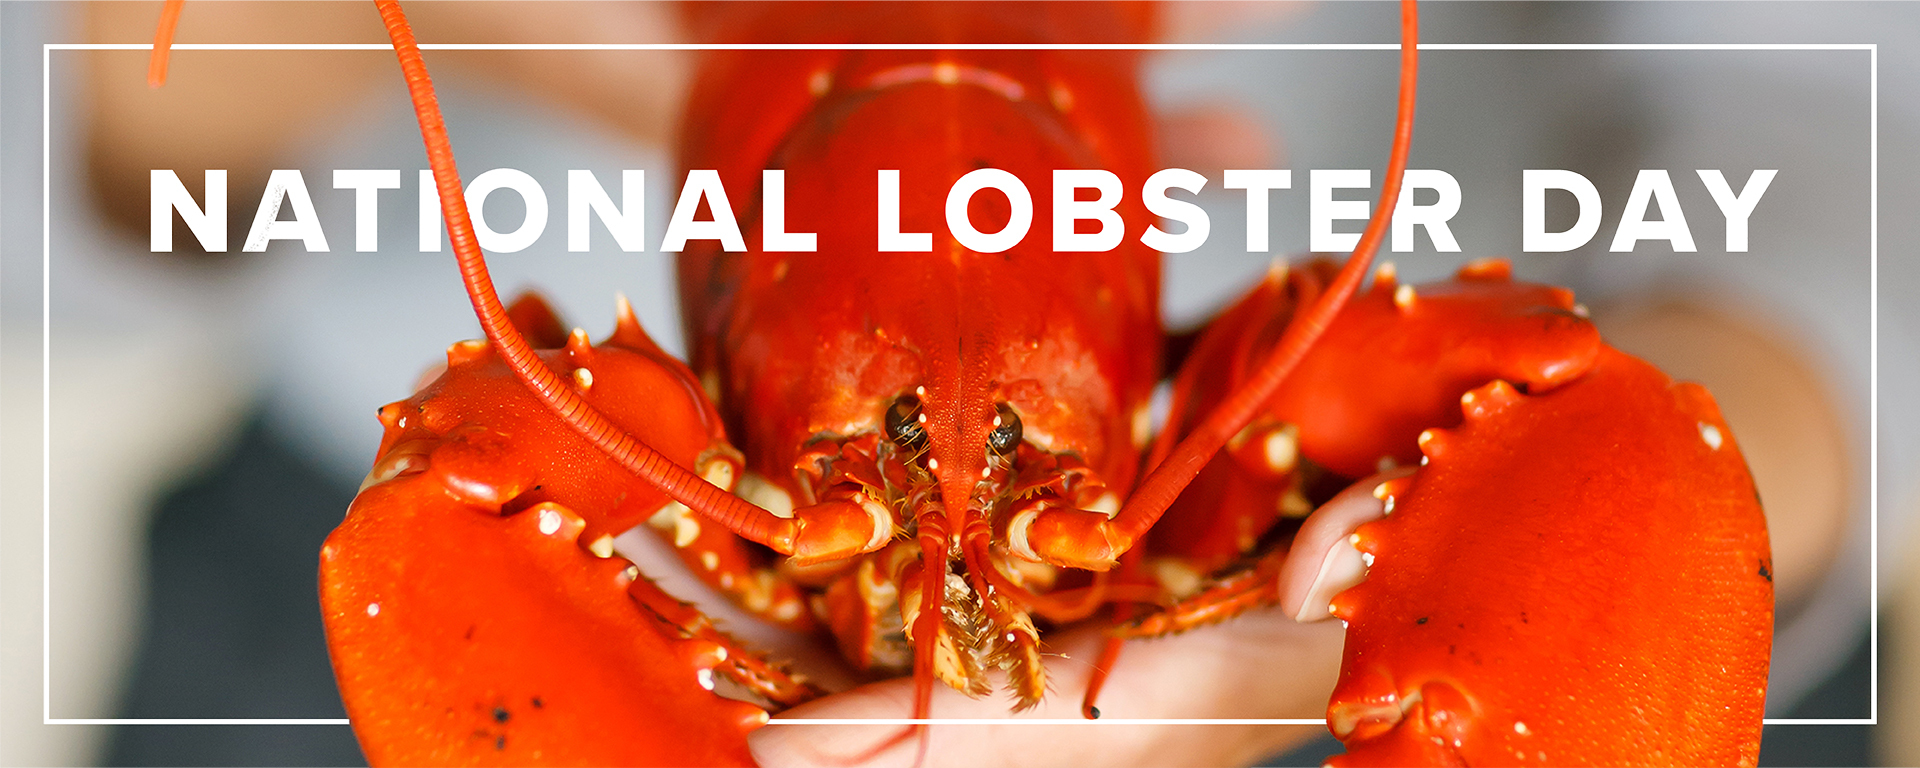 15 Facts About National Lobster Day